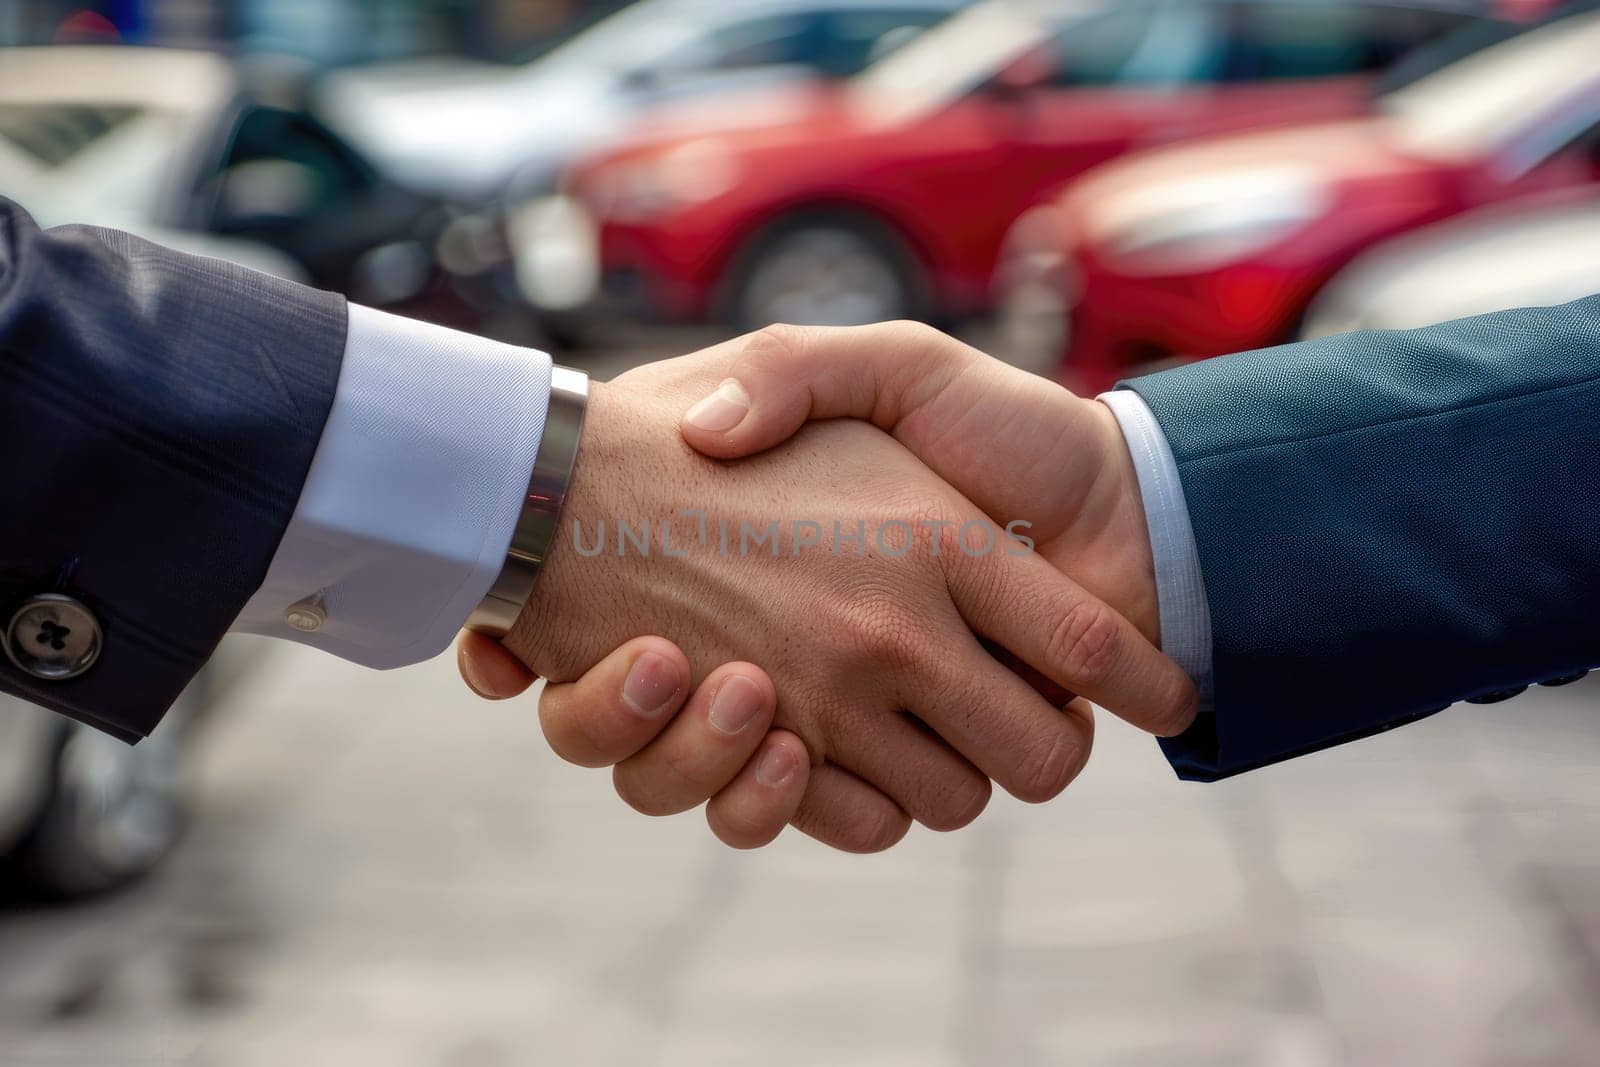 Close up of a professional handshake at a car dealership with cars in background.